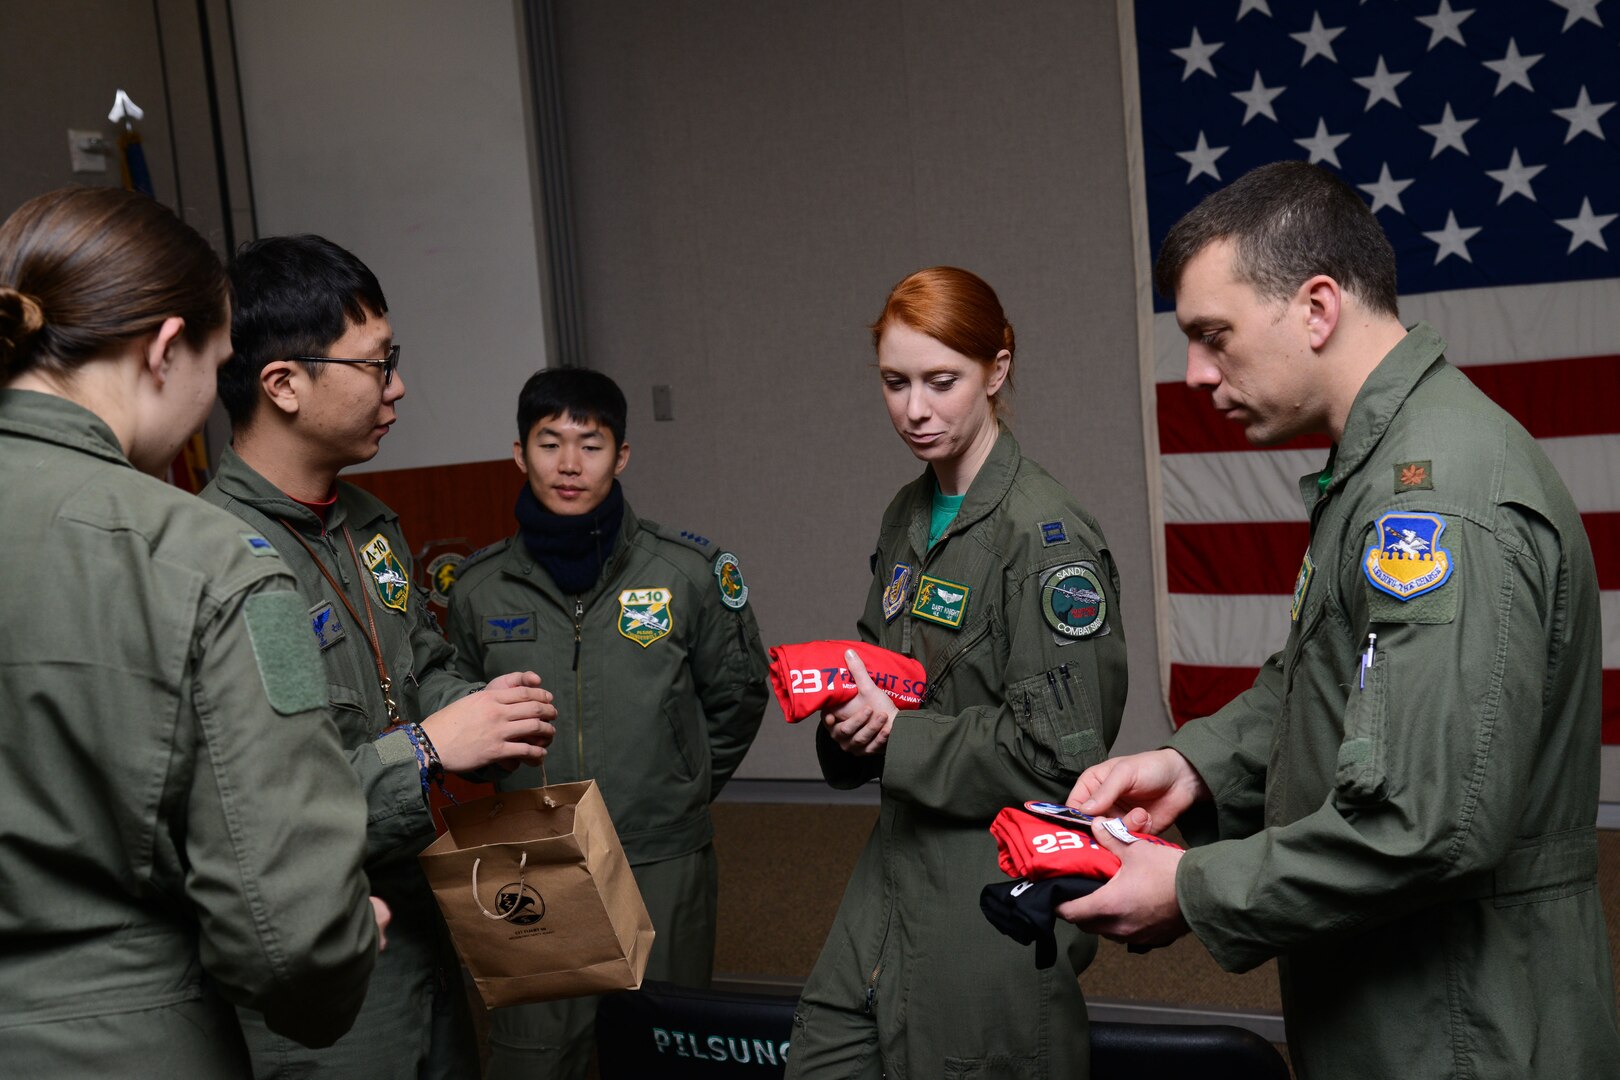 151218-F-LM669-009 OSAN AIR BASE, Republic of Korea (Dec. 17, 2015) U.S. Air Force and Republic of Korea air force pilots exchange squadron gifts during Buddy Wing 15-8 at Osan Air Base, ROK, Dec. 18, 2015. The pilots exchanged their squadron’s patches and t-shirts before the ROKAF pilots depart Osan. (U.S. Air Force photo by Airman 1st Class Dillian Bamman/Released)